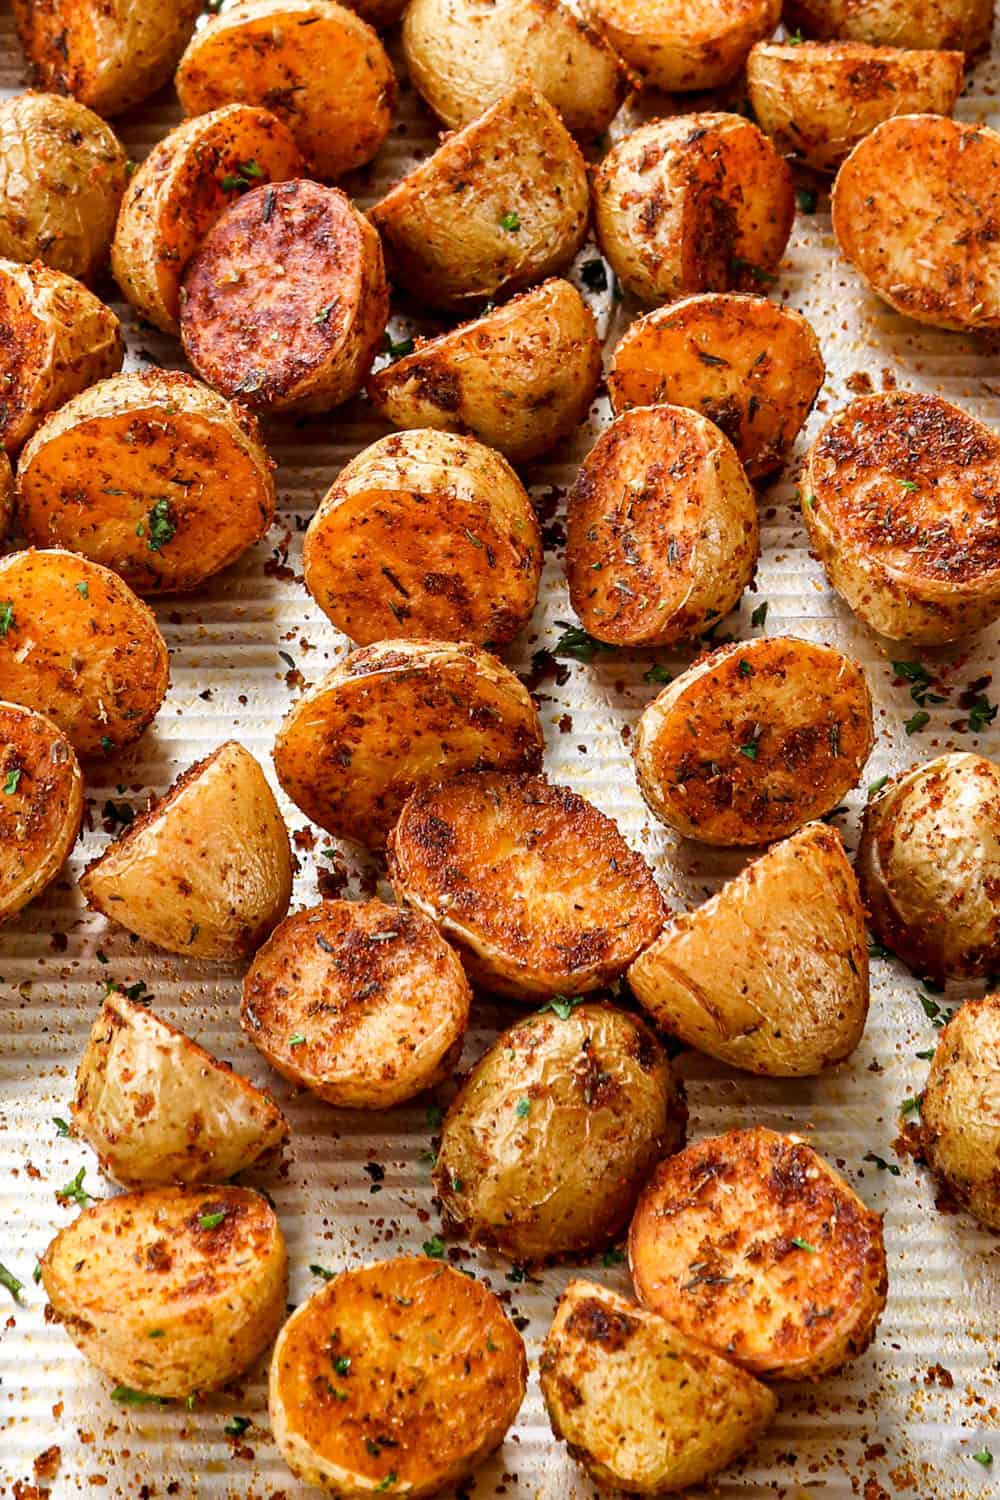 up close of Roasted Cajun potatoes showing how crispy they are